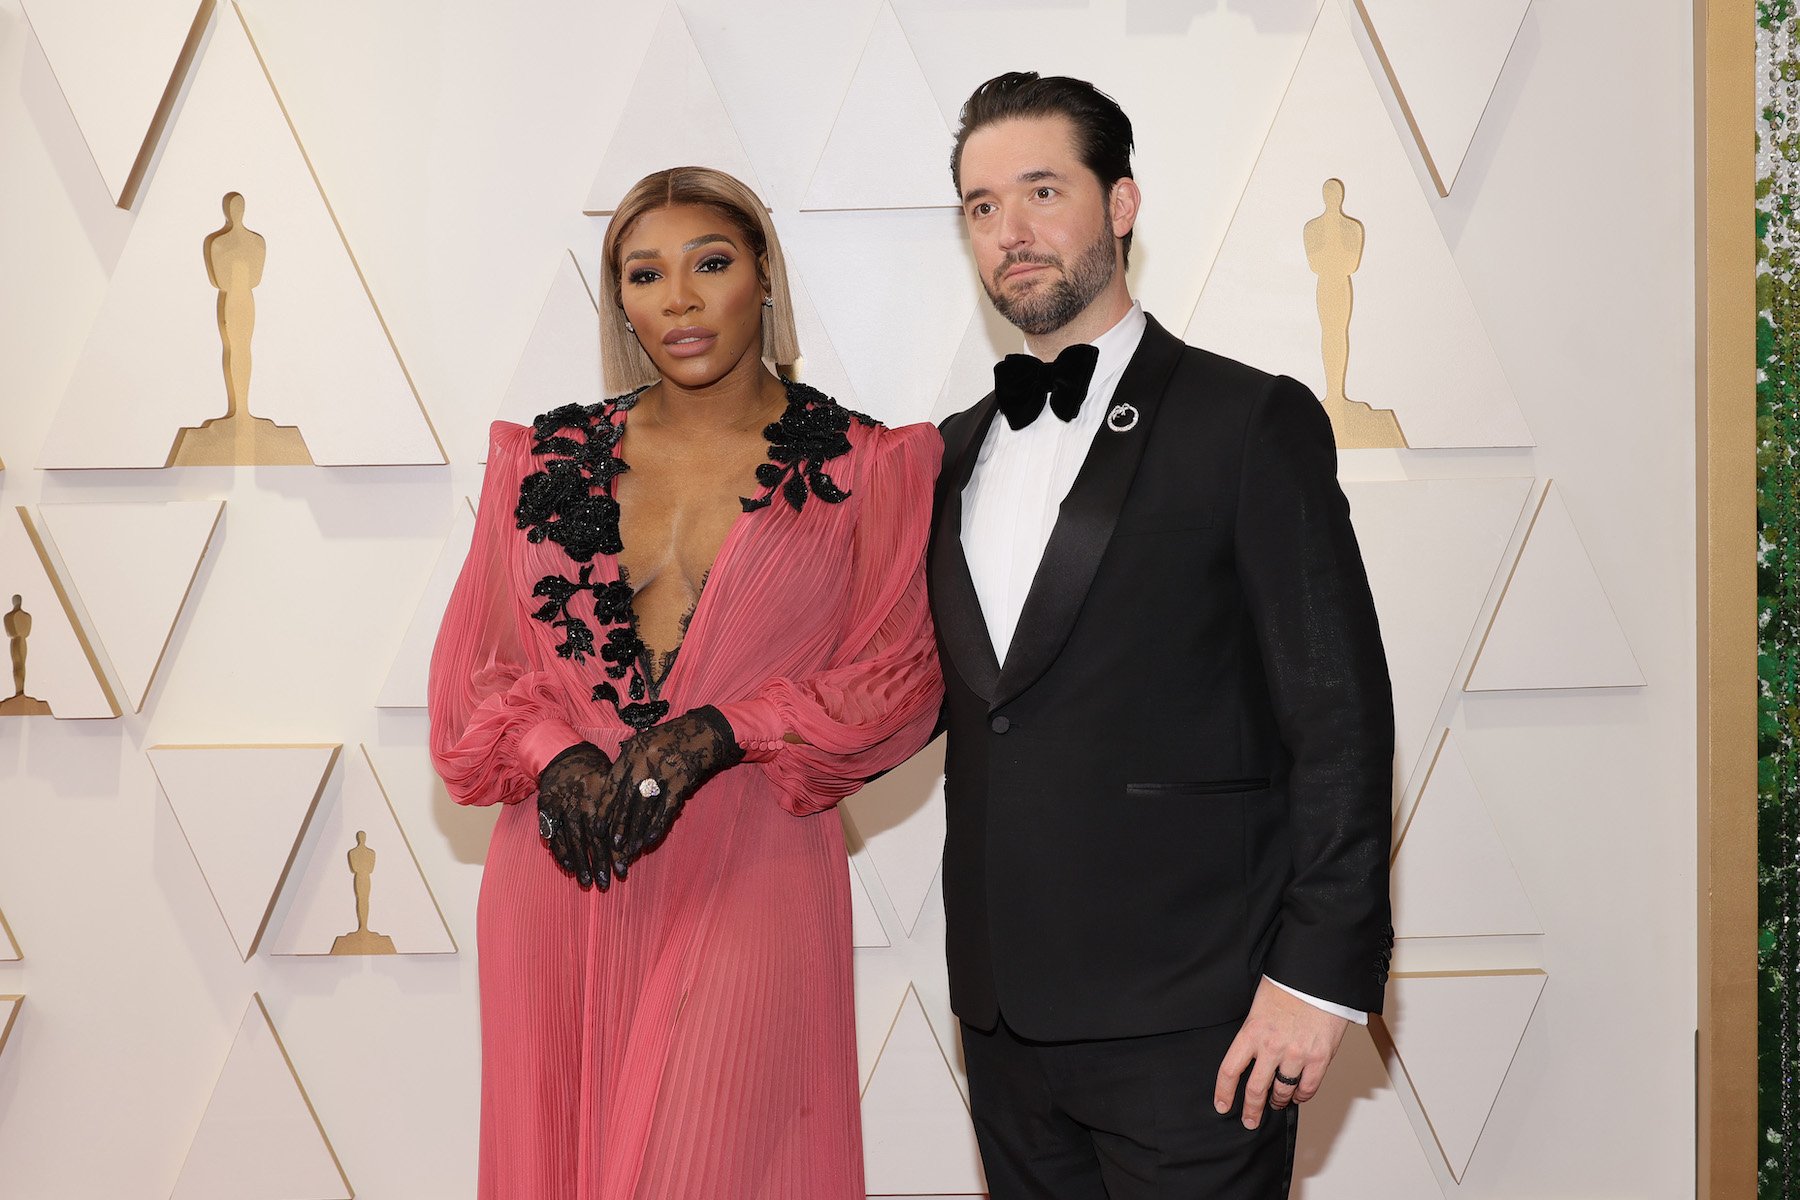 Serena Williams' Husband Alexis Ohanian Responds to Drake Lyric Calling Him  'Groupie', News, Scores, Highlights, Stats, and Rumors